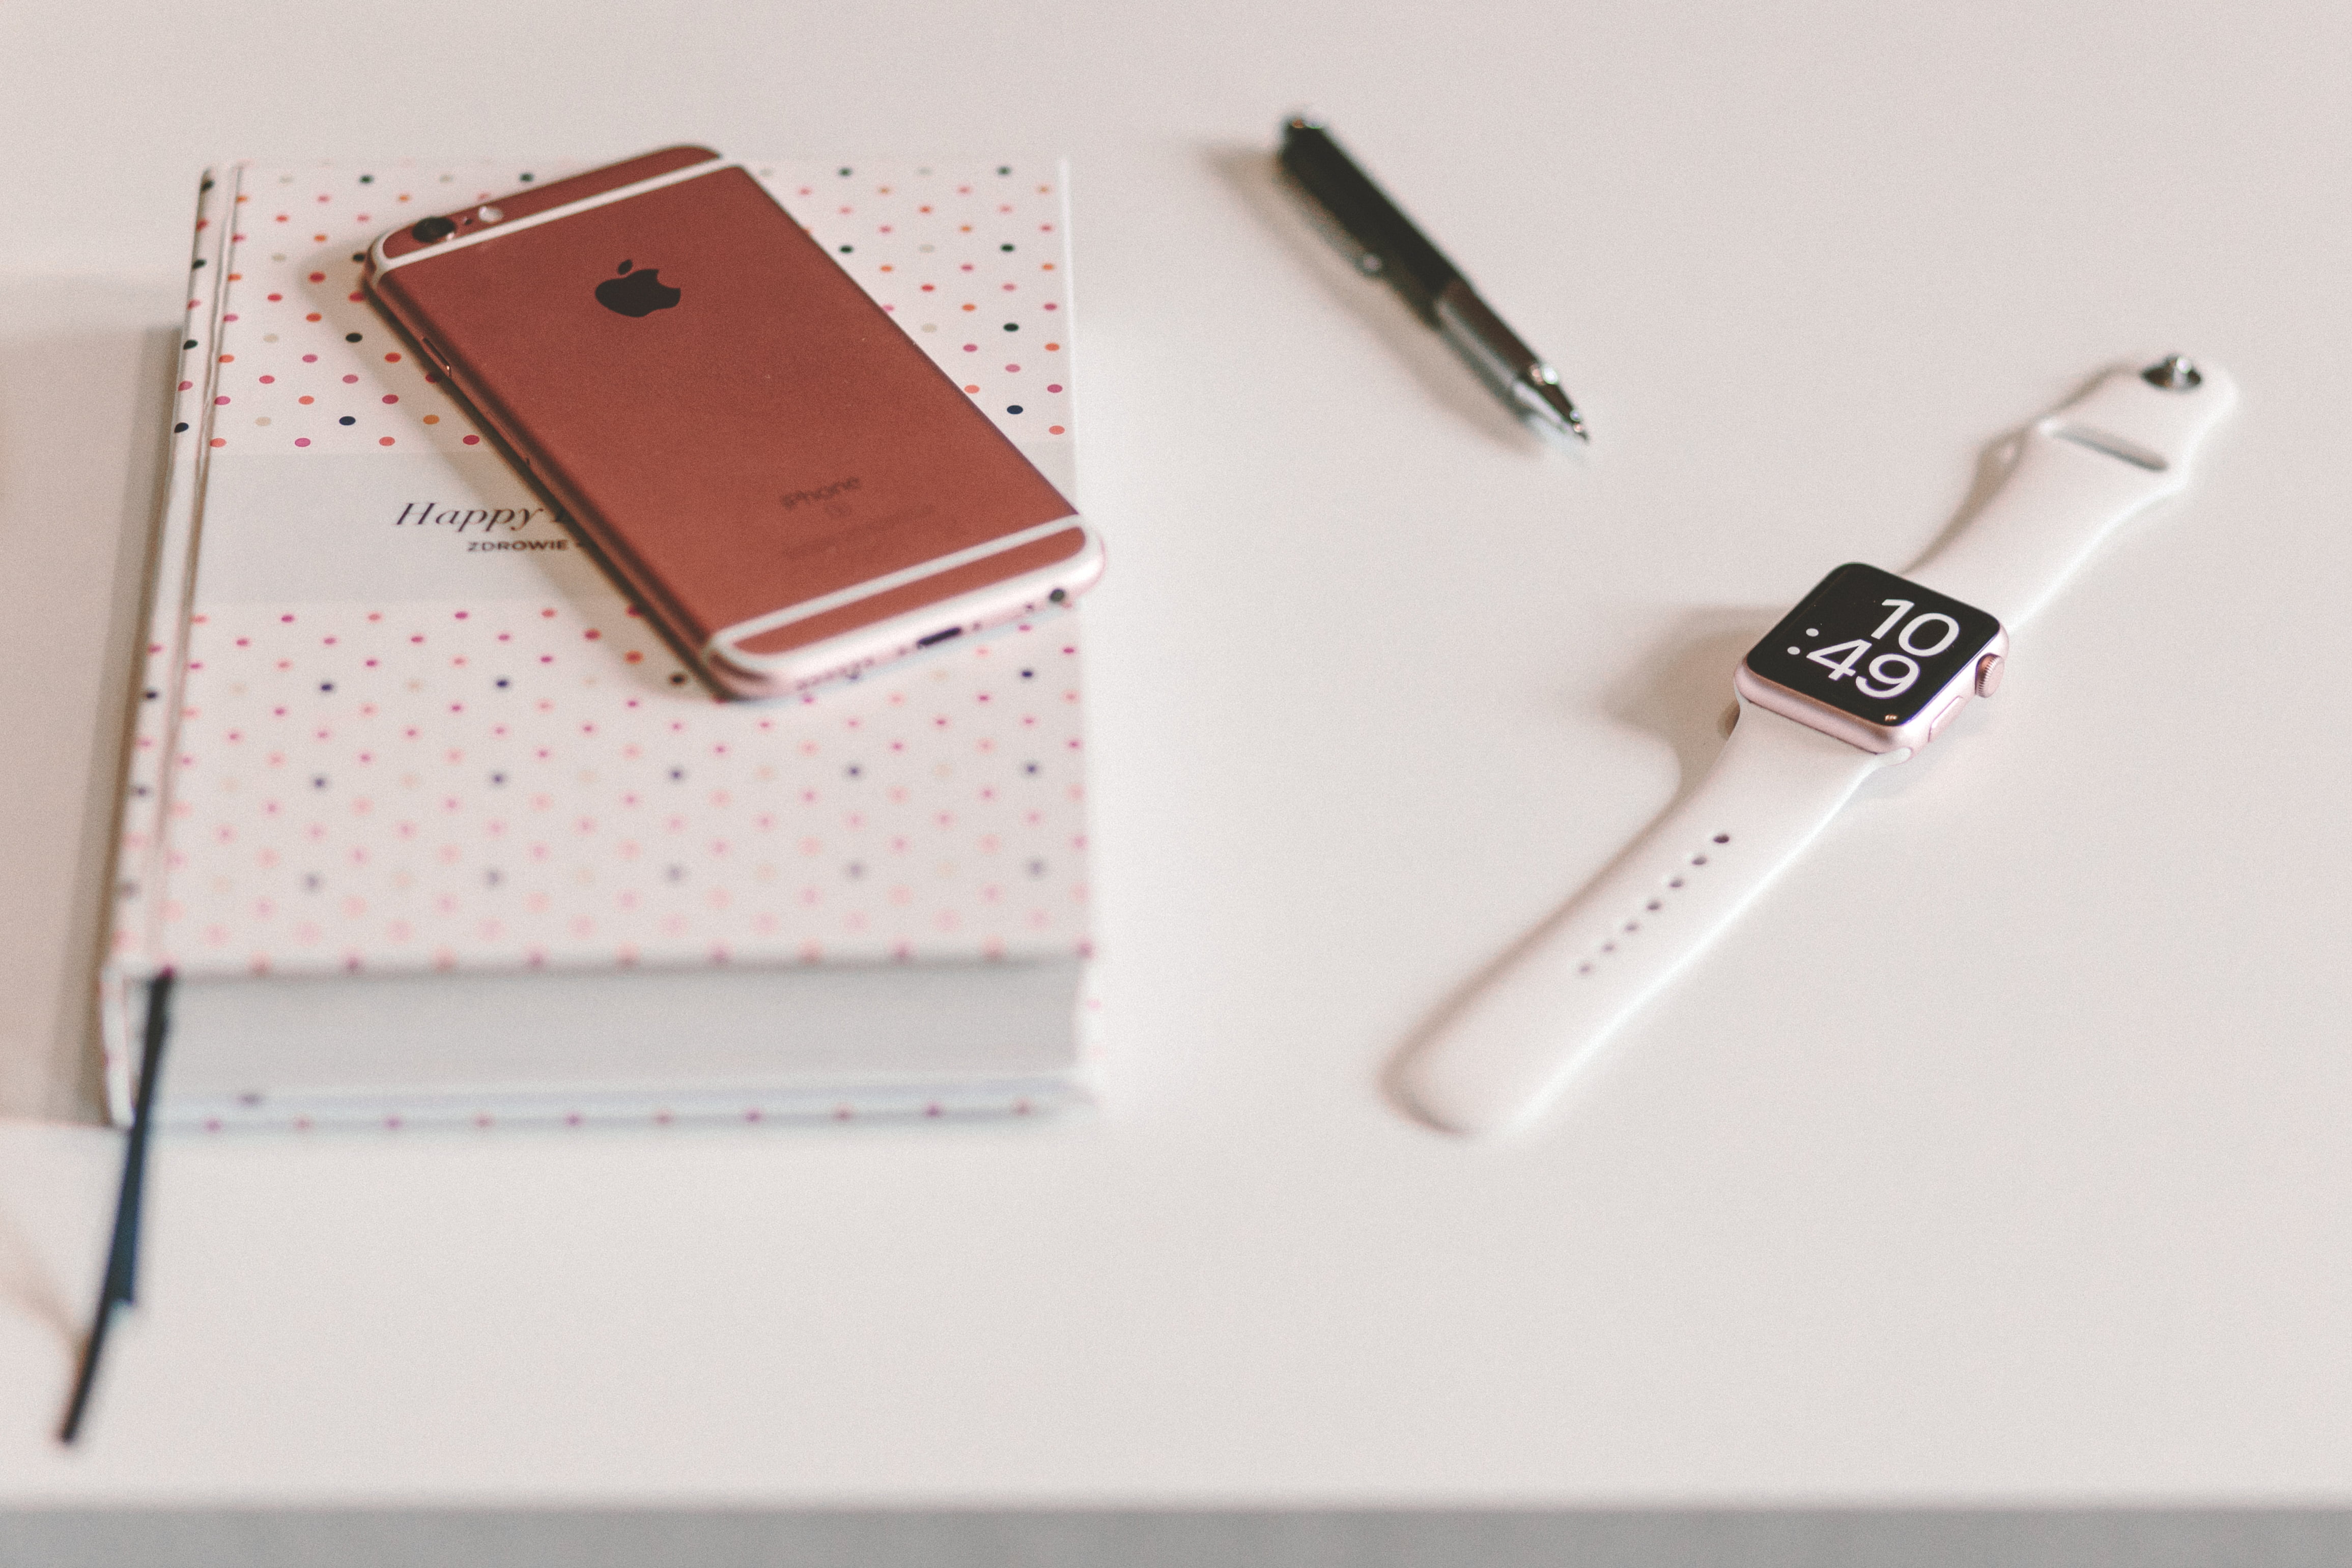 Rose Gold Iphone 6s On Top Of Book Beside Twist Pen - White Iphone Watch - HD Wallpaper 